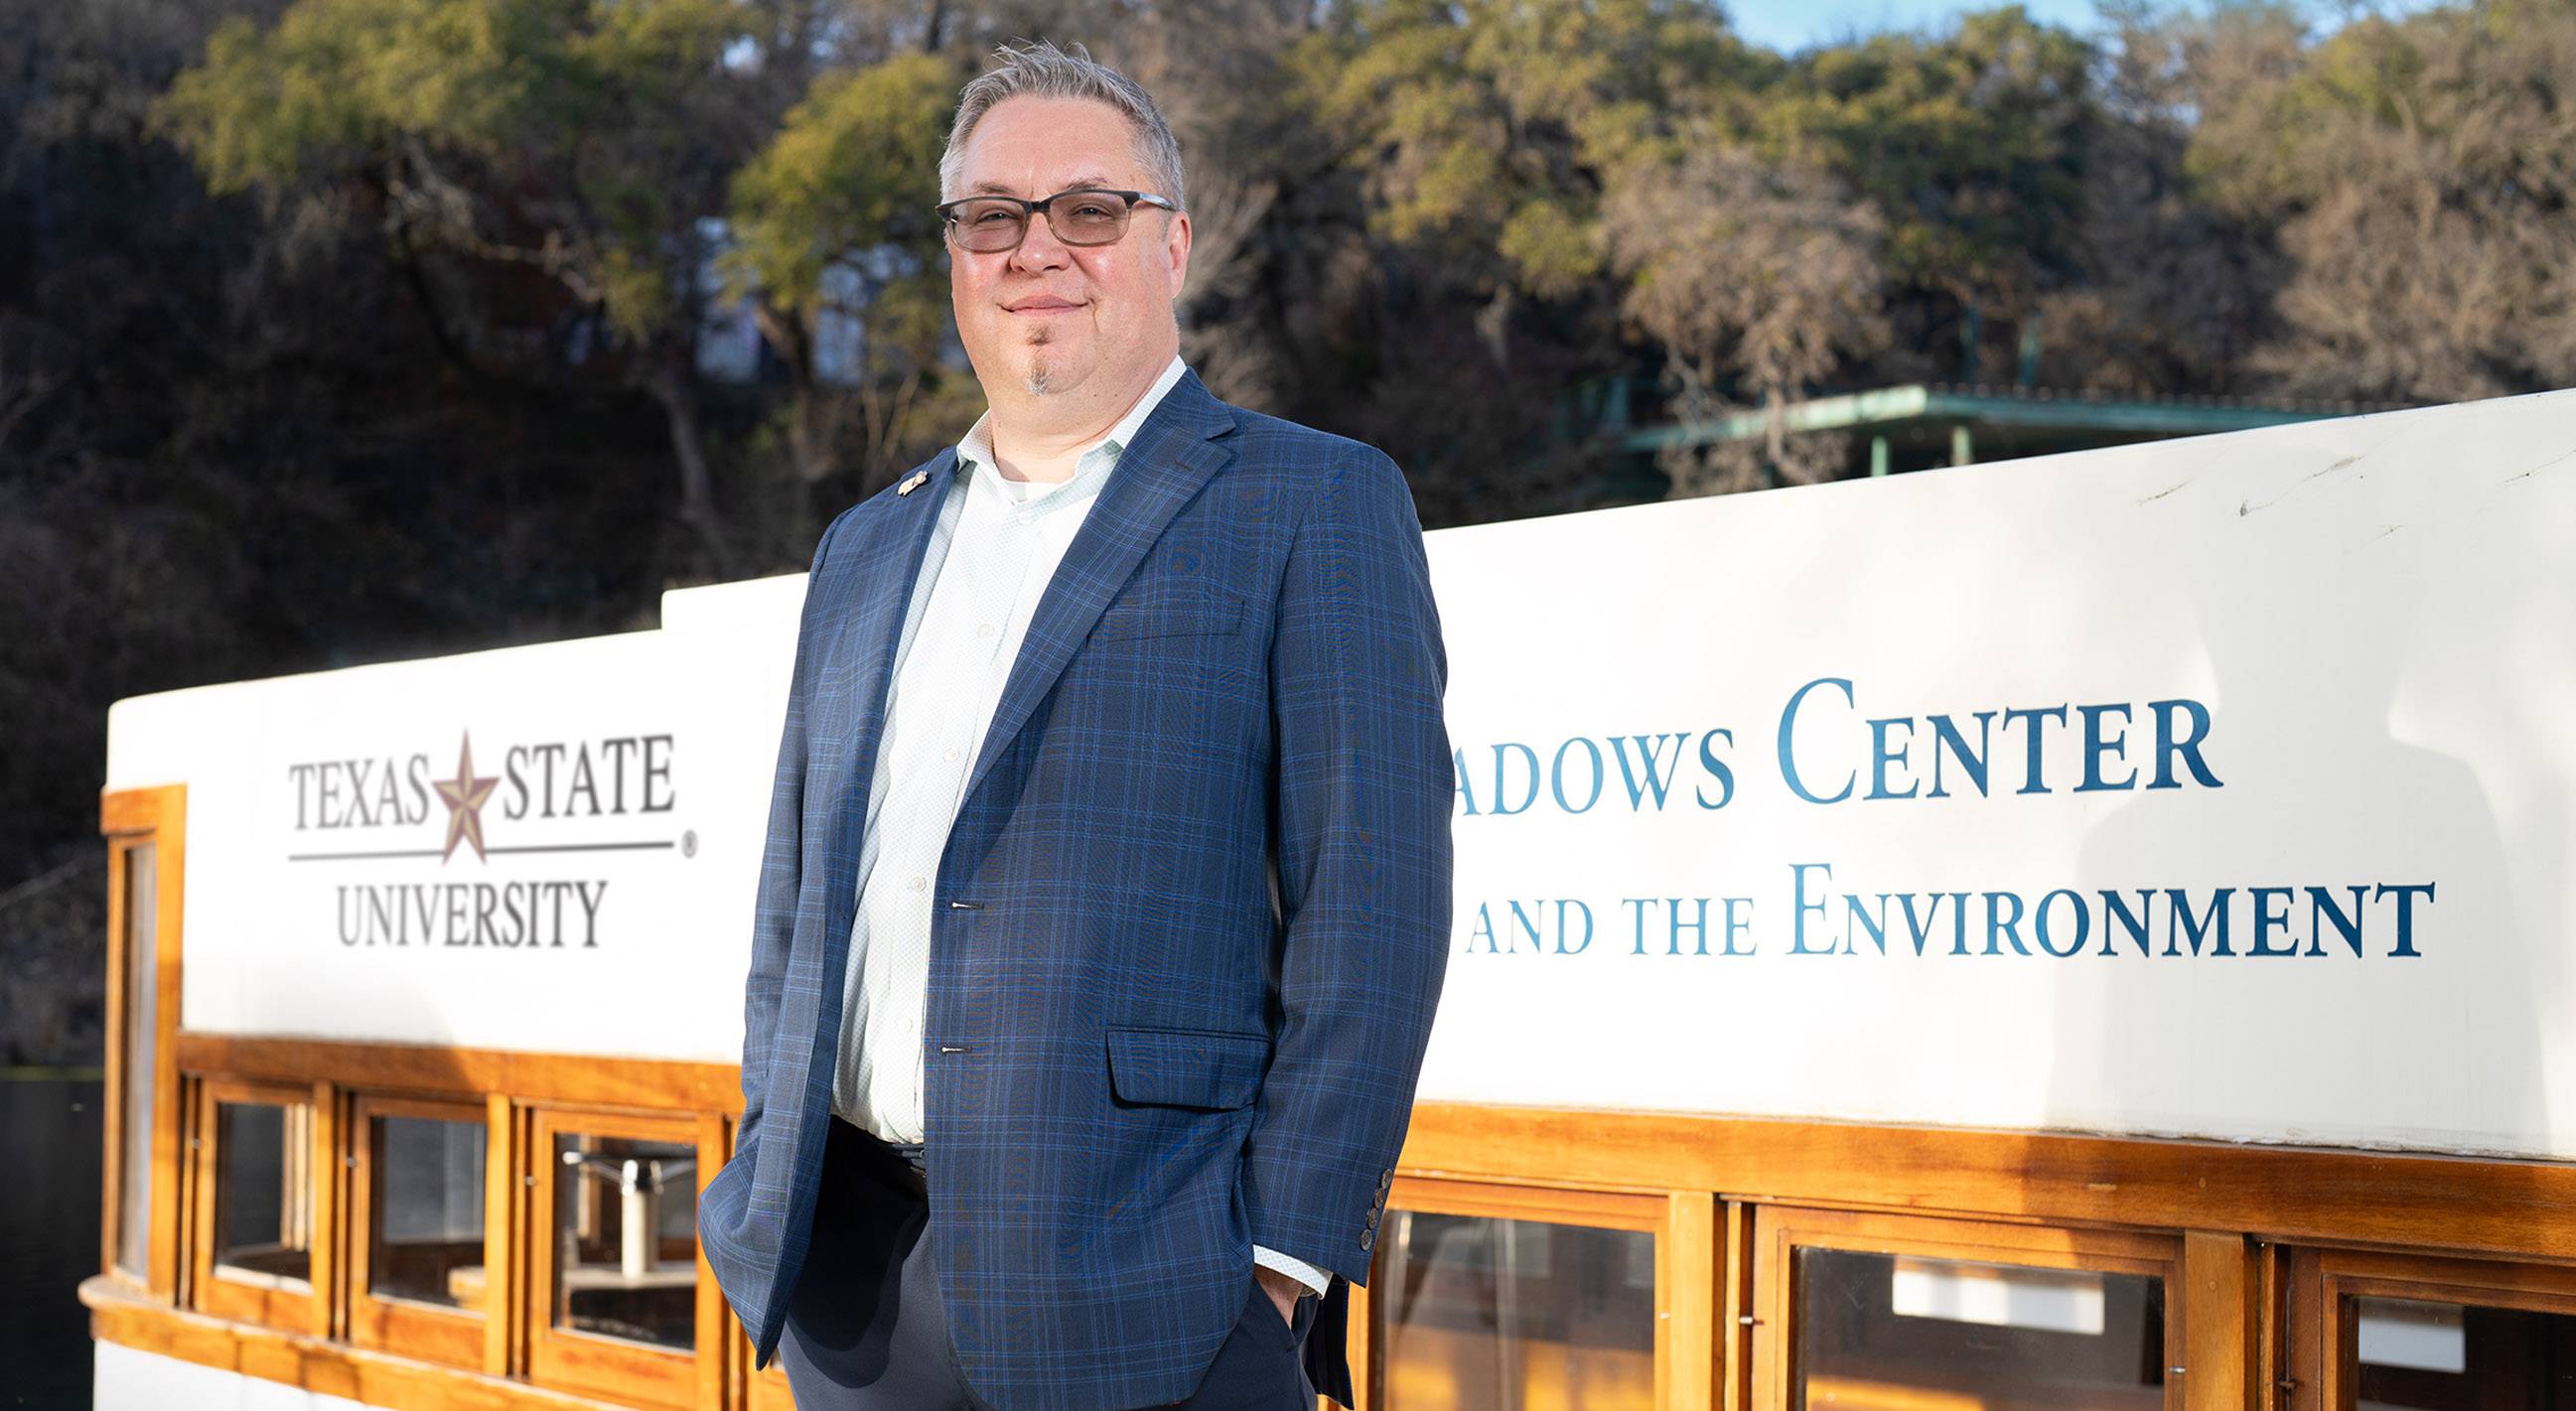 robert mace standing in front of glass bottom boat that reads "texas state univeristy / the meadows center" 